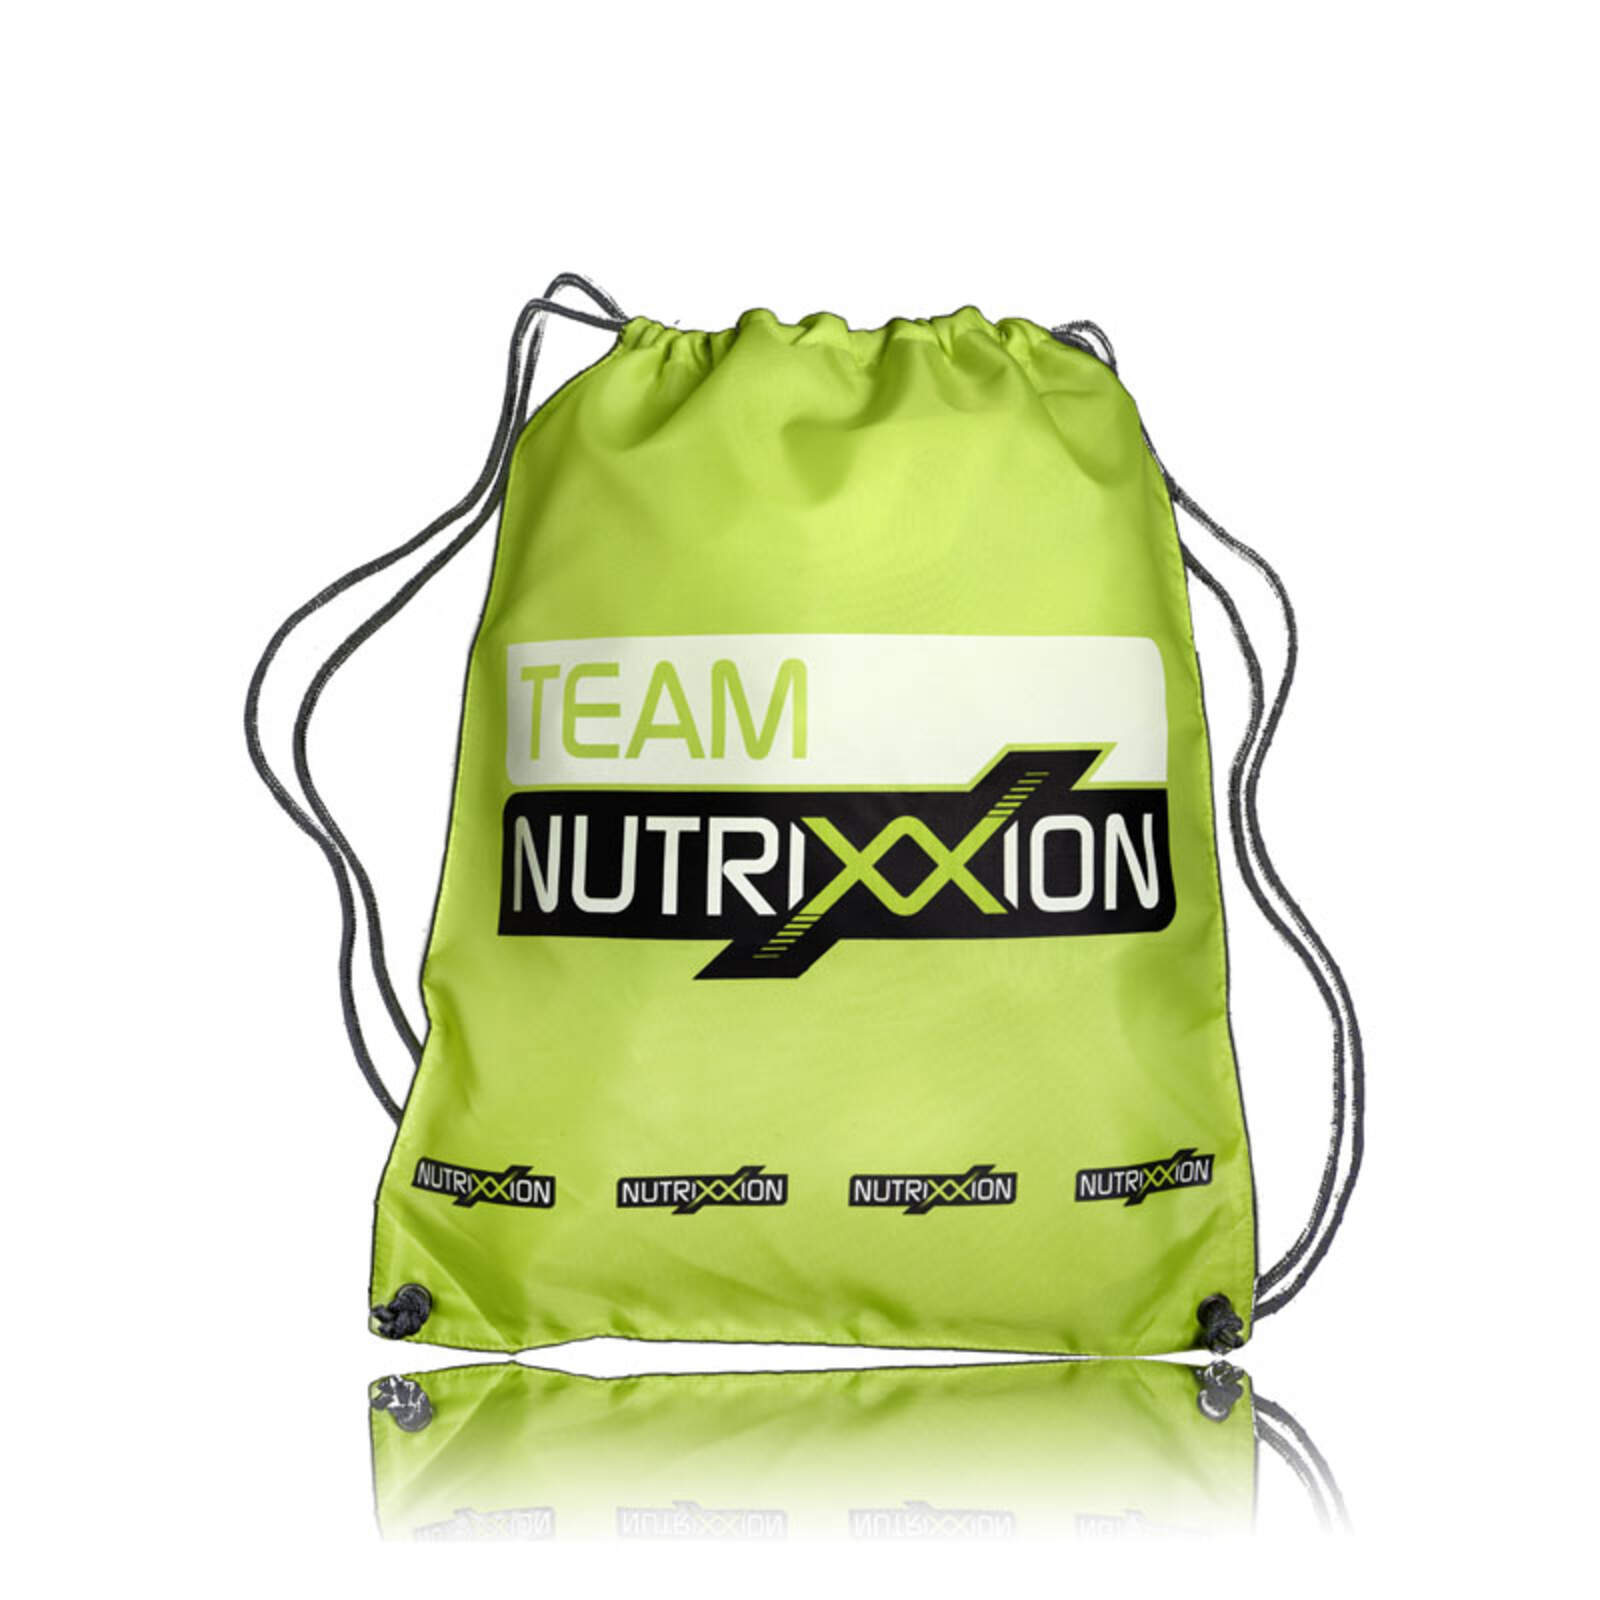 NUTRIXXION Bag one size fits all